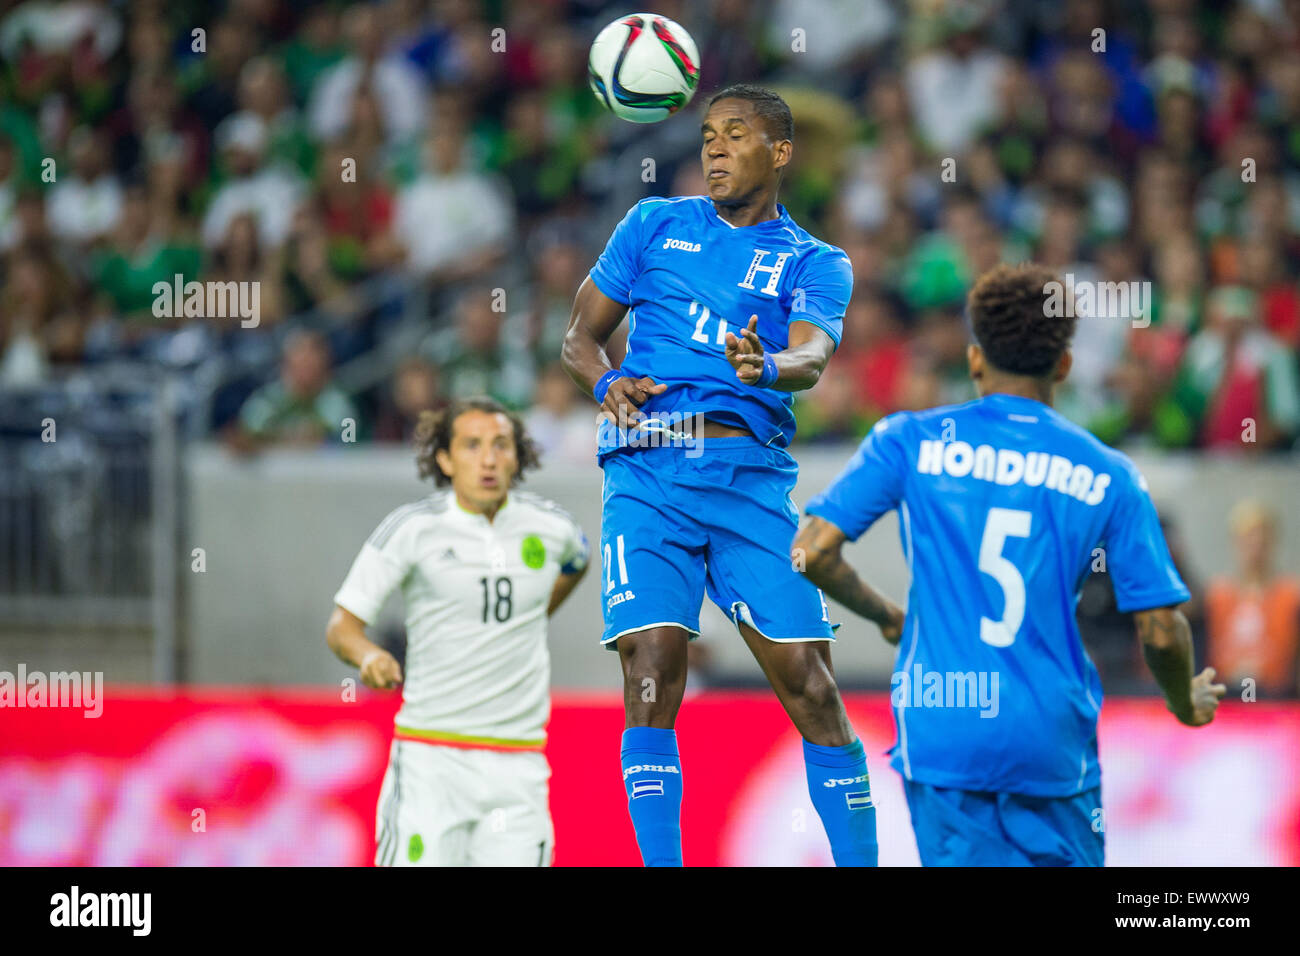 Houston, TX, USA. 1st July, 2015. Honduras defender Brayan Beckeles (21) heads the ball during the 1st half of an international soccer match between Honduras and Mexico at NRG Stadium in Houston, TX. Trask Smith/CSM/Alamy Live News Stock Photo